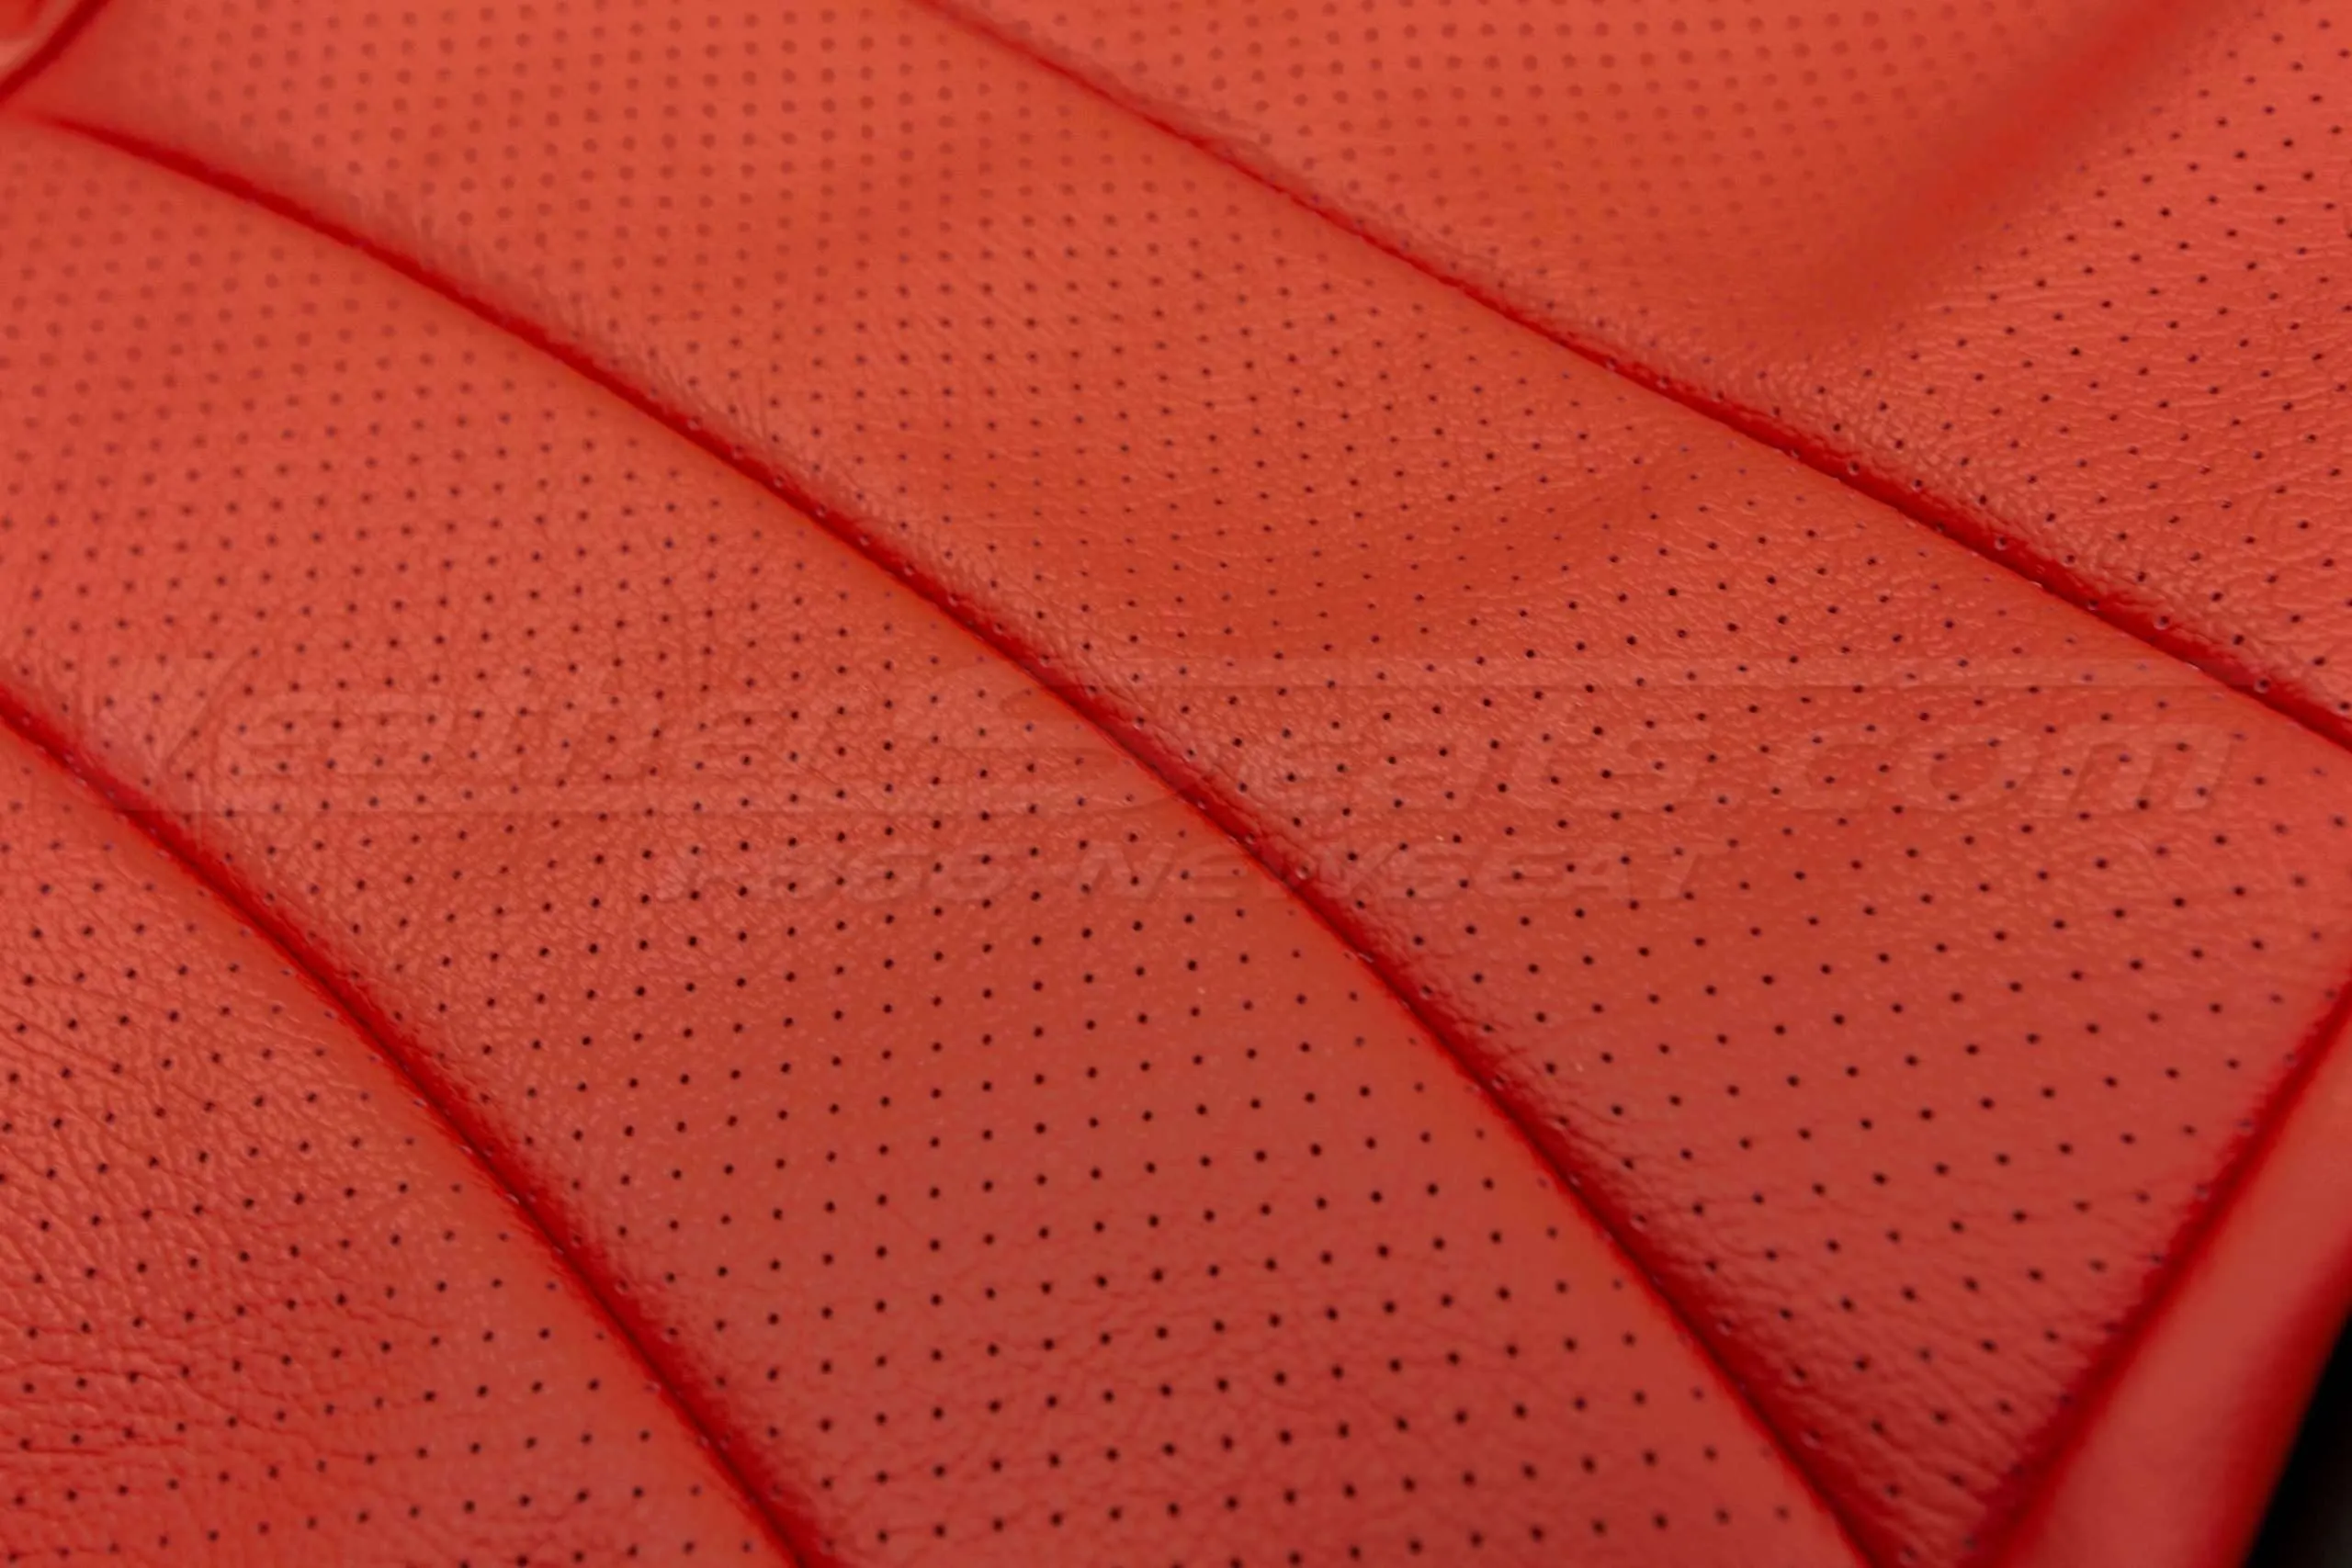 Honda S2000 Seat Upholstery - Black & Bright Red - Perforation close-up